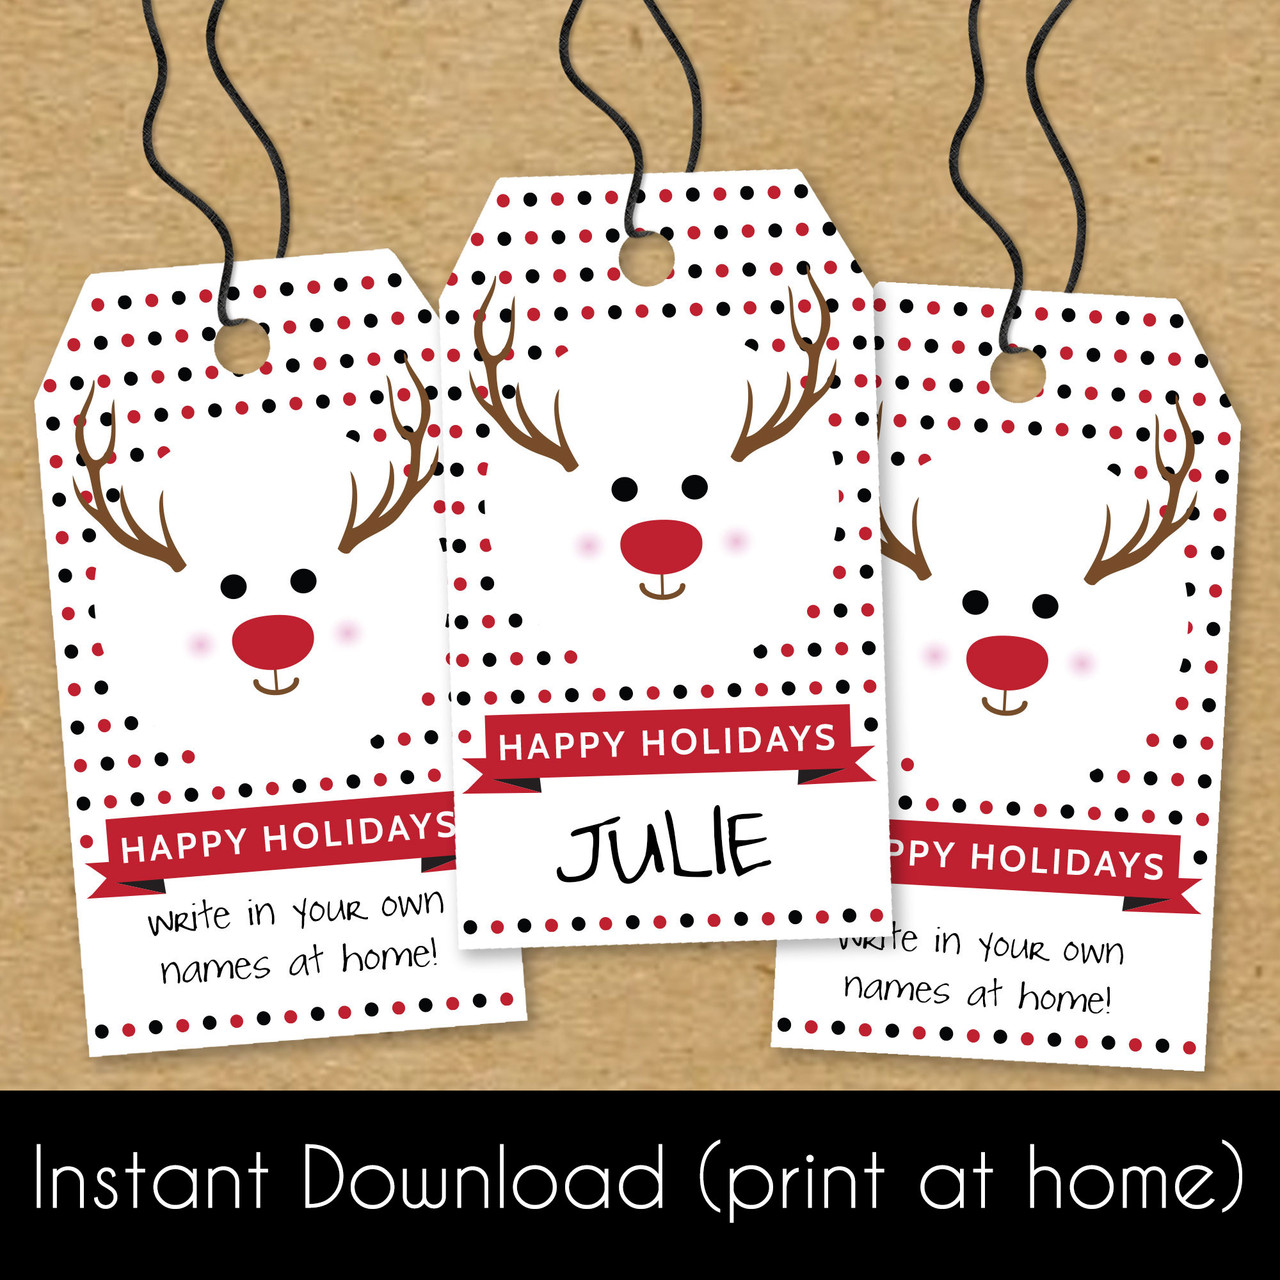 https://cdn11.bigcommerce.com/s-5grzuu6/images/stencil/1280x1280/products/4384/44270/Printable_Reindeer_Christmas_Gift_Tags_Download__57740.1637629134.jpg?c=2